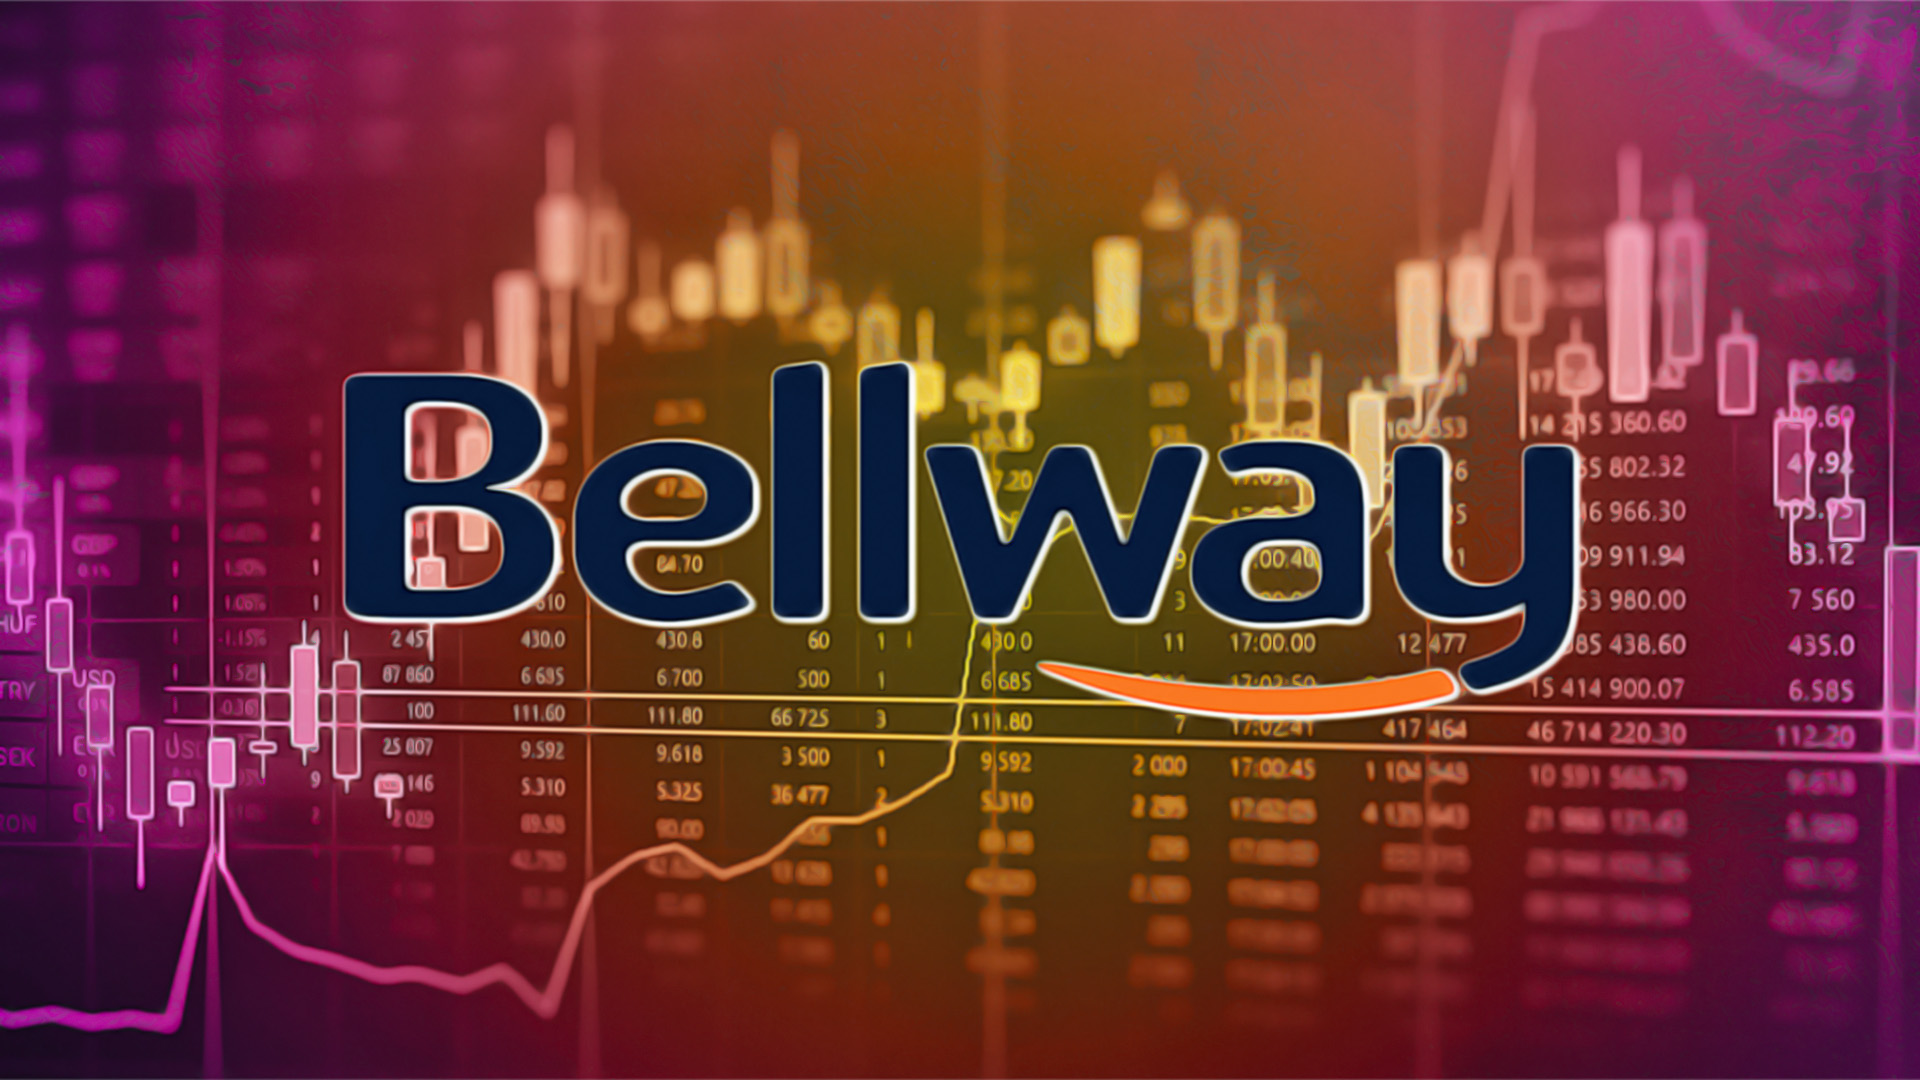 Belway Stock Price Forecast: Financial and Technical Analysis